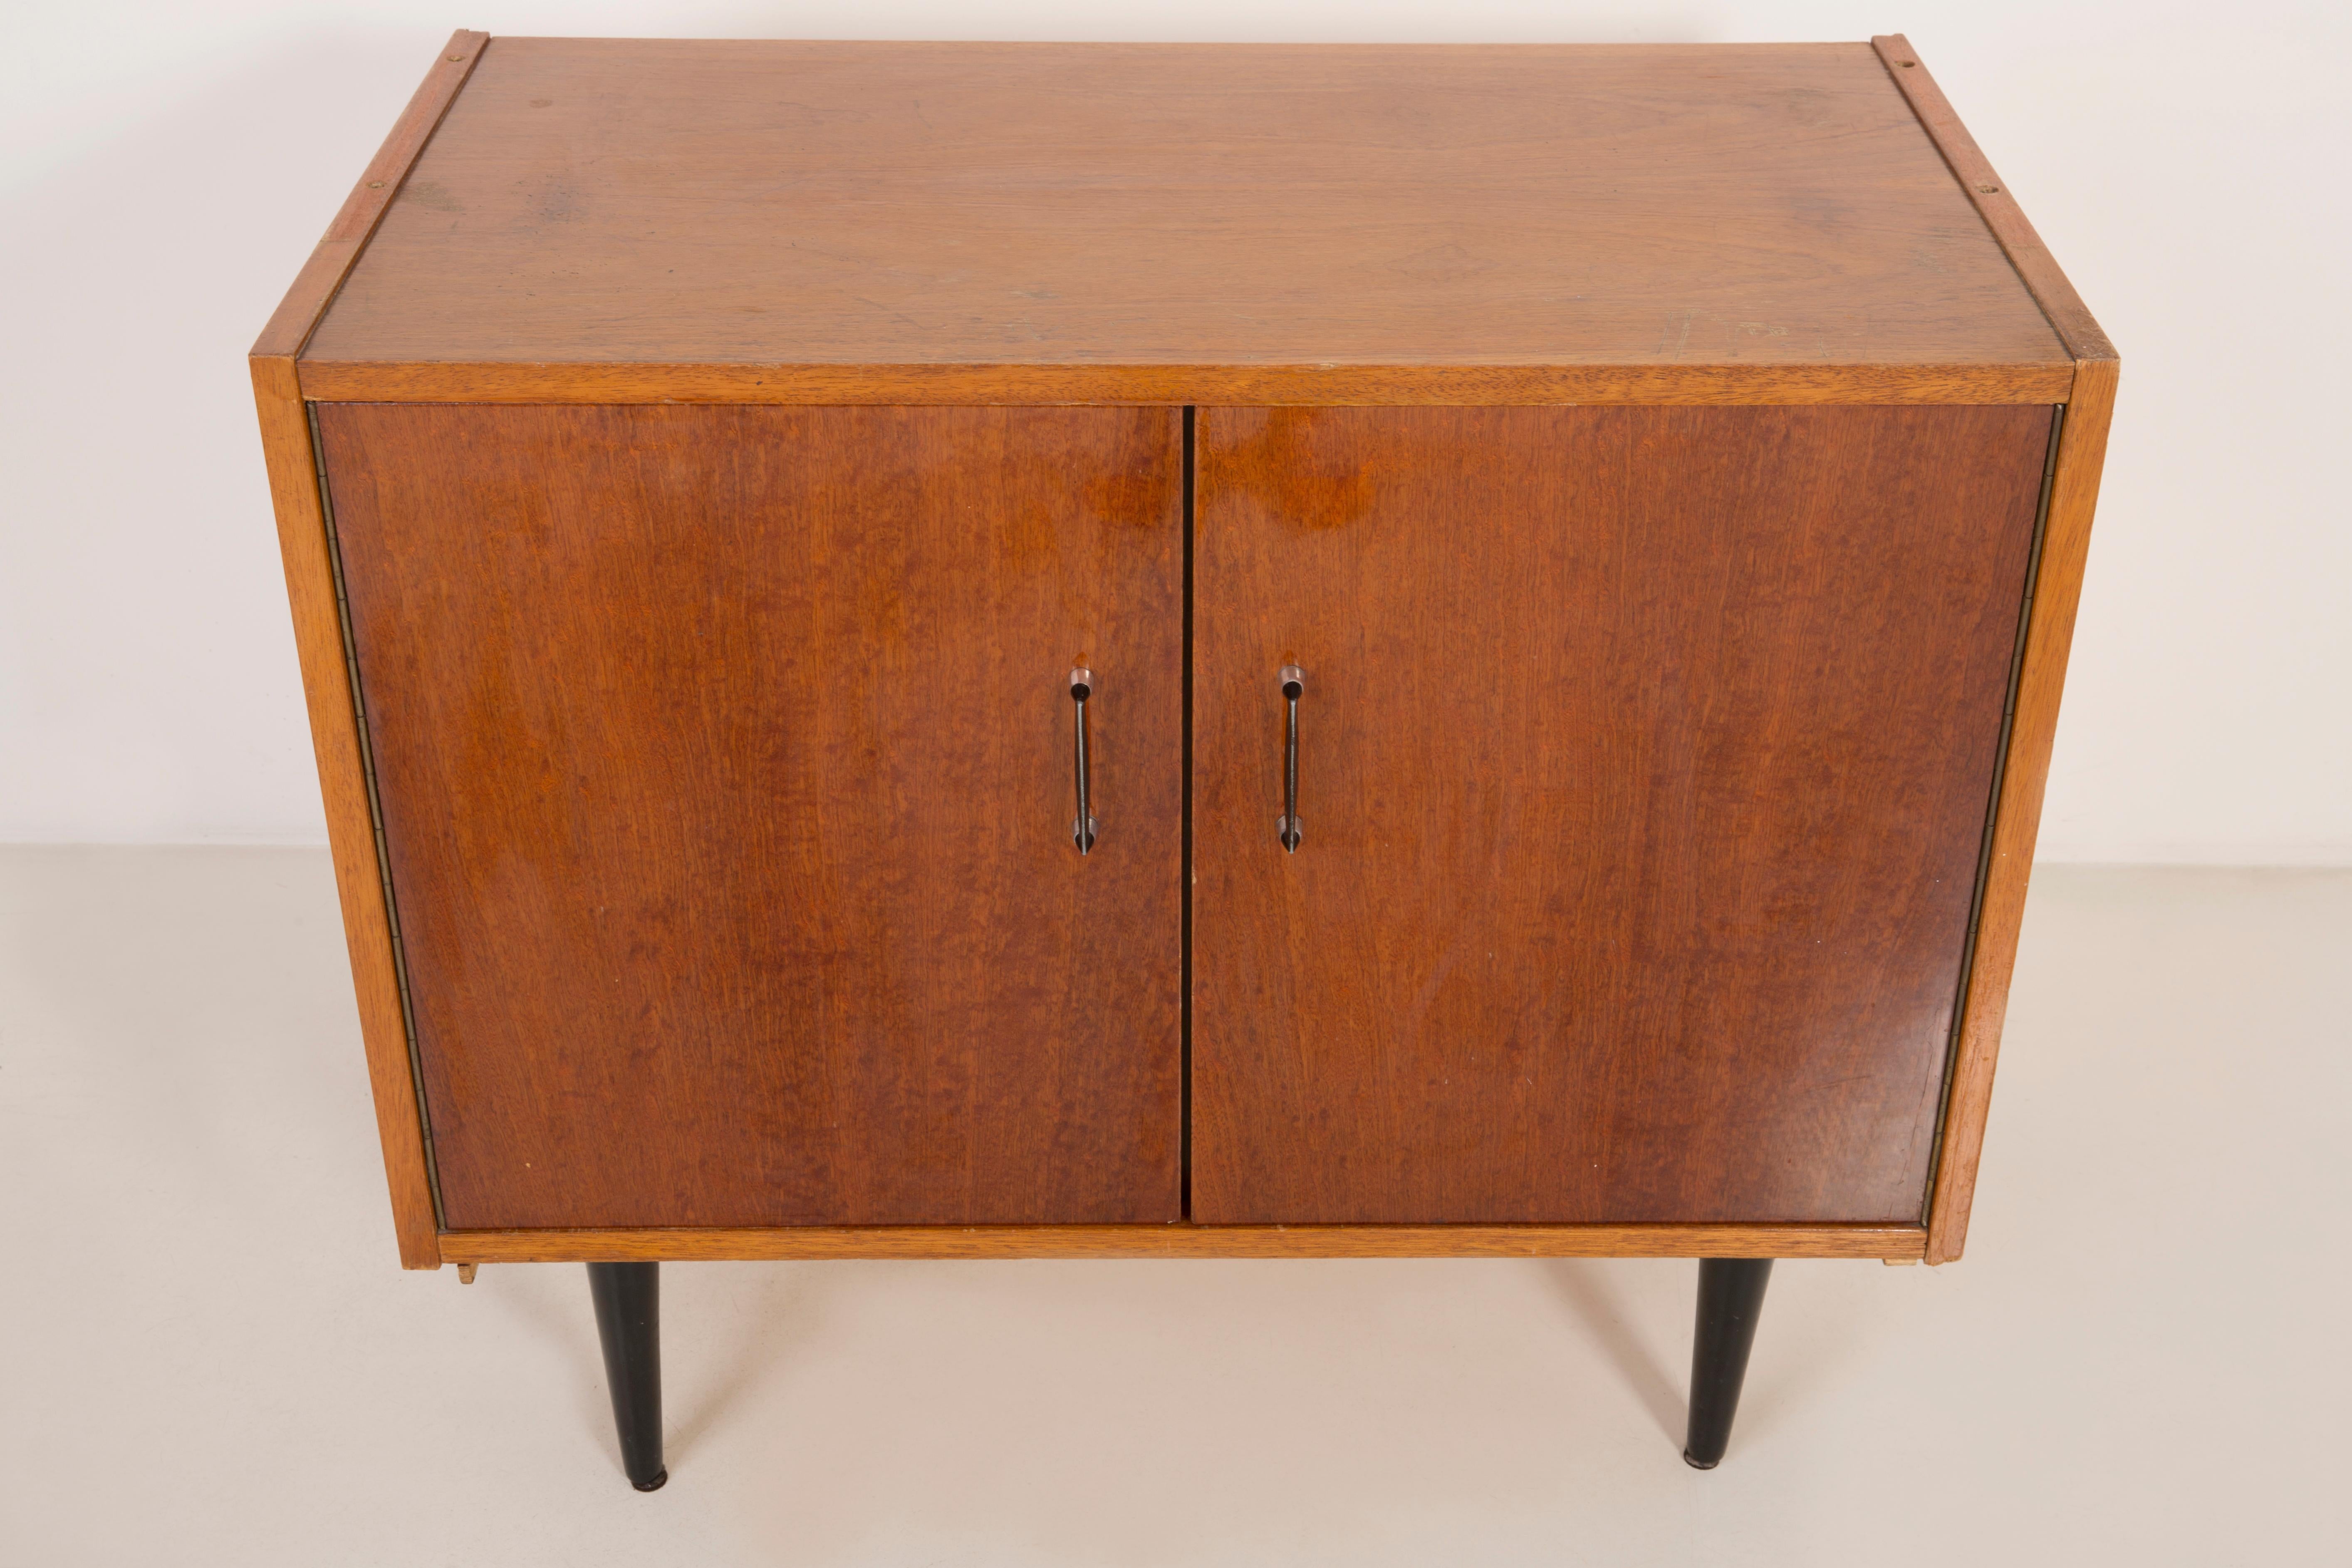 TV side table/sideboard from the 1960s. It was manufactured in Poland. The table was made of wood, it was refreshed. Very good original vintage condition.